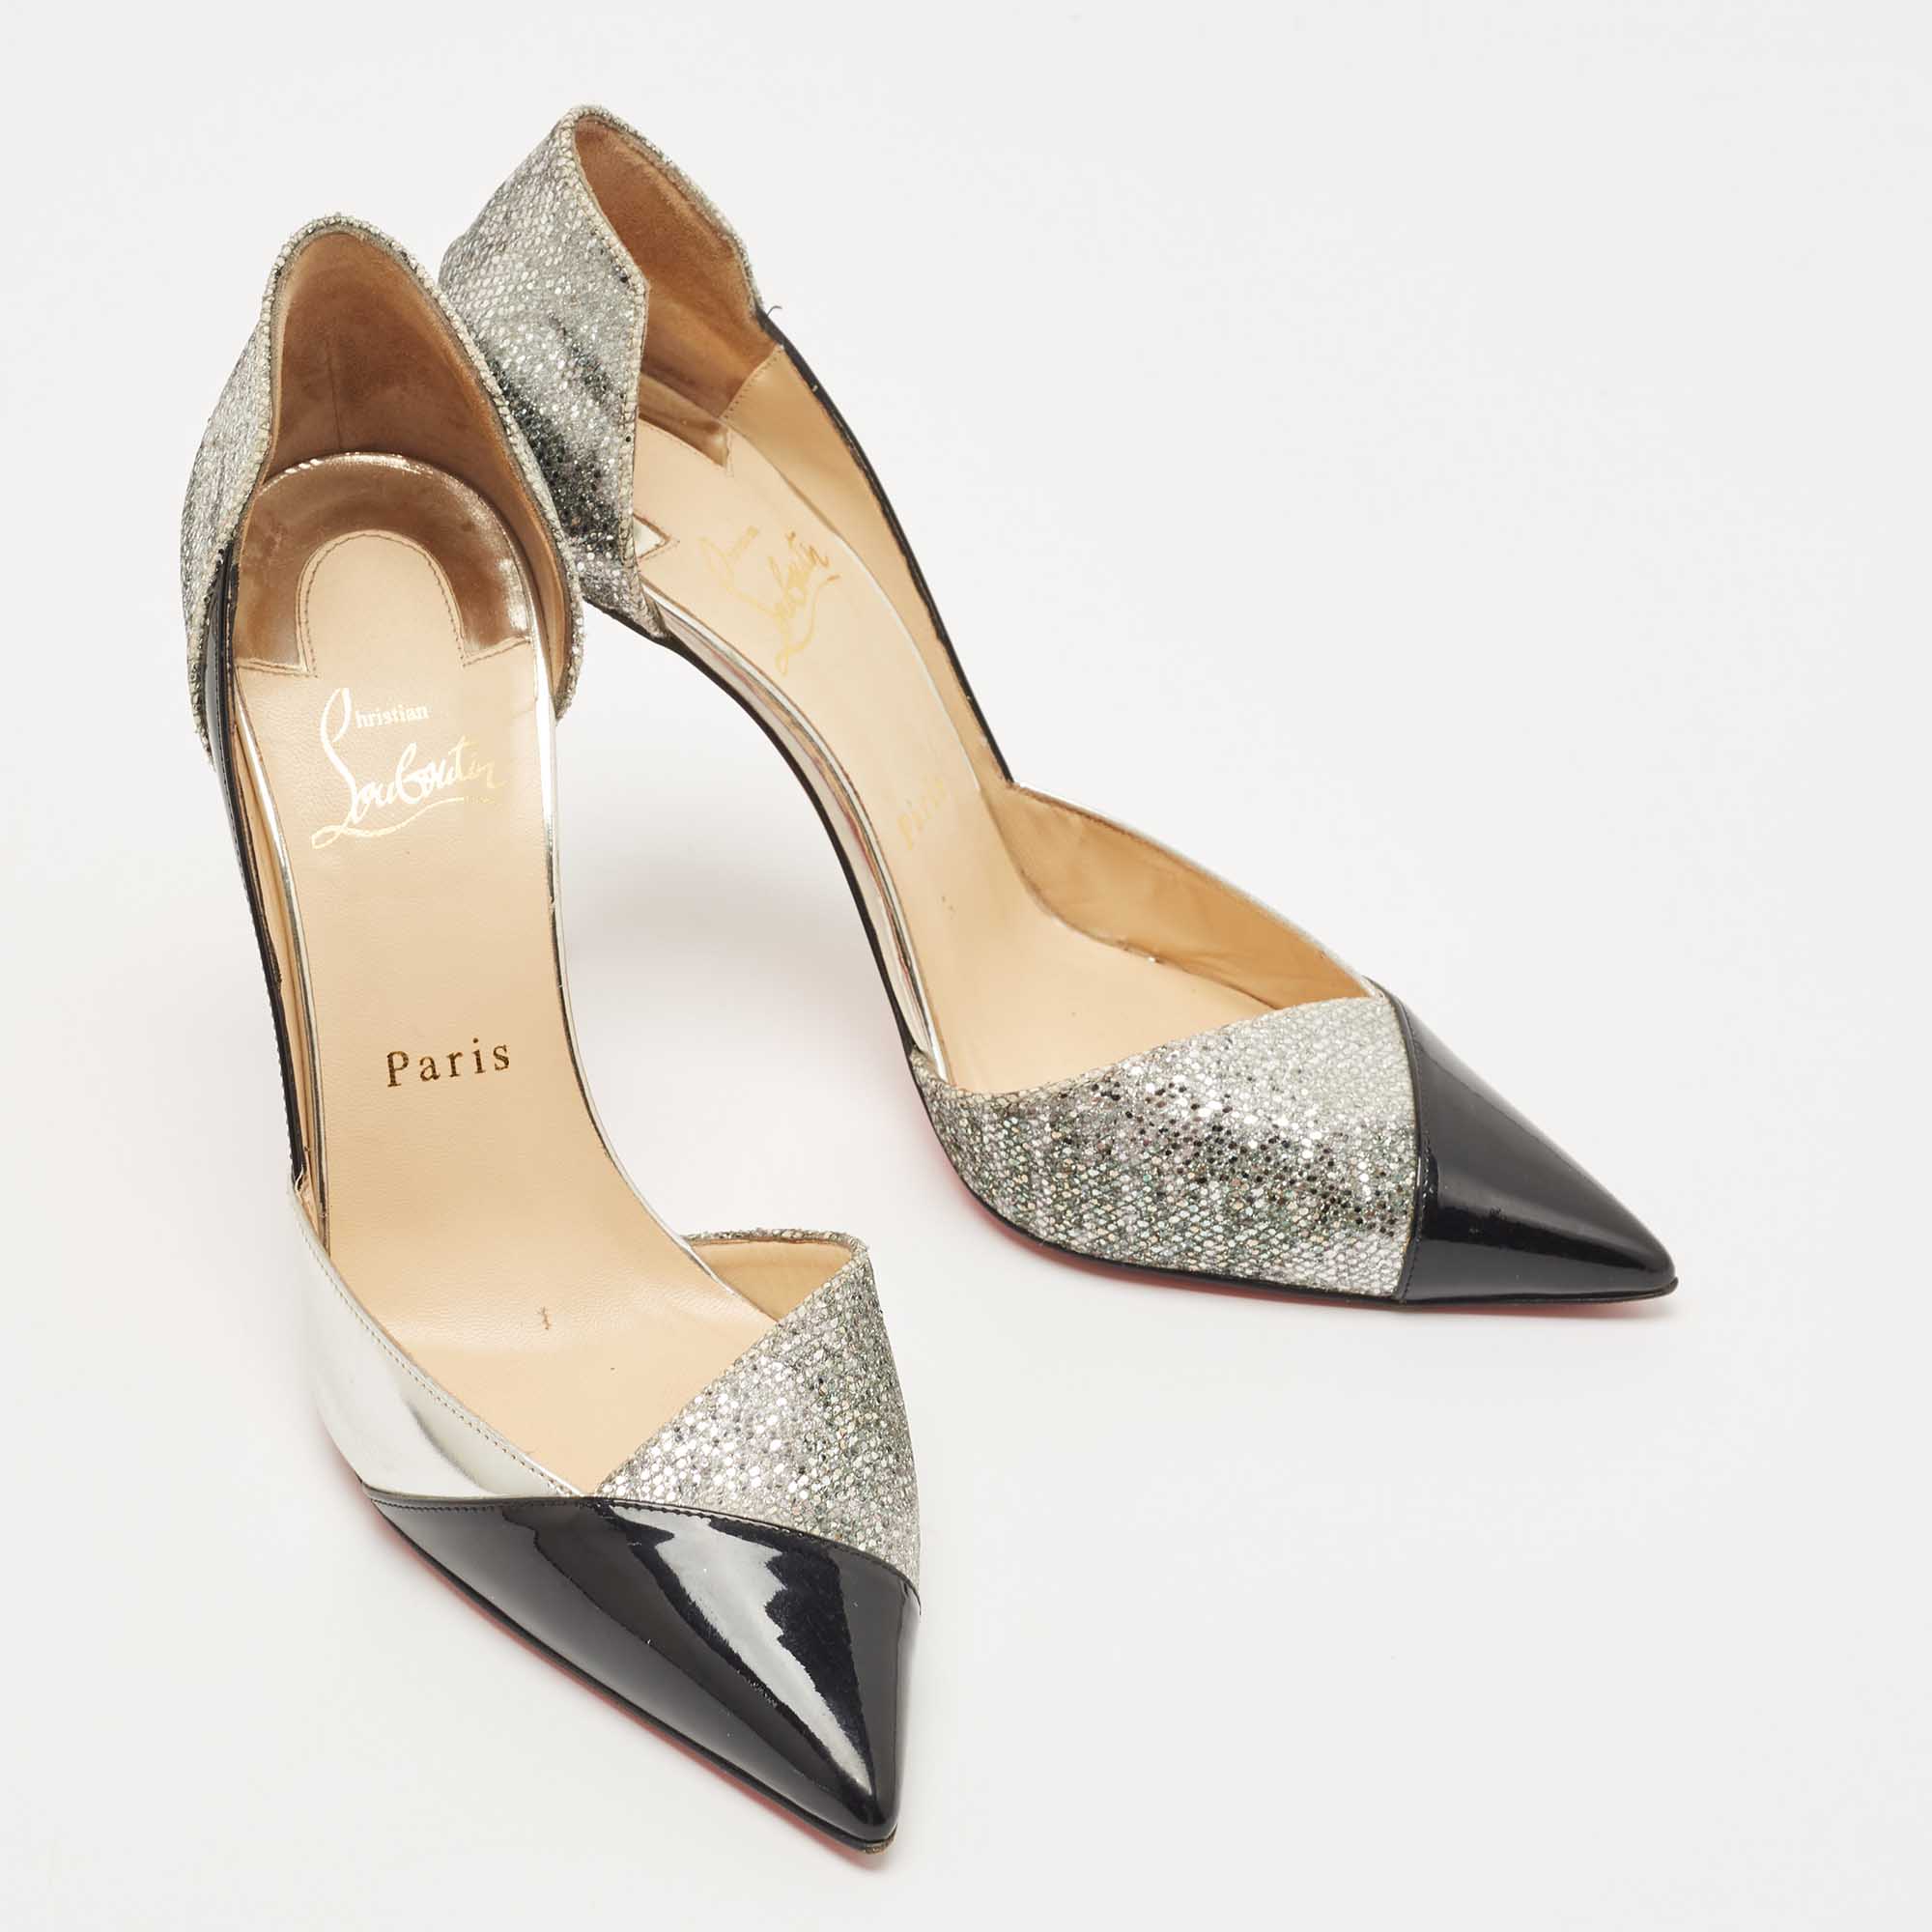 Christian Louboutin Silver/Black Patent And Glitter Tac Clac Pumps Size 38.5